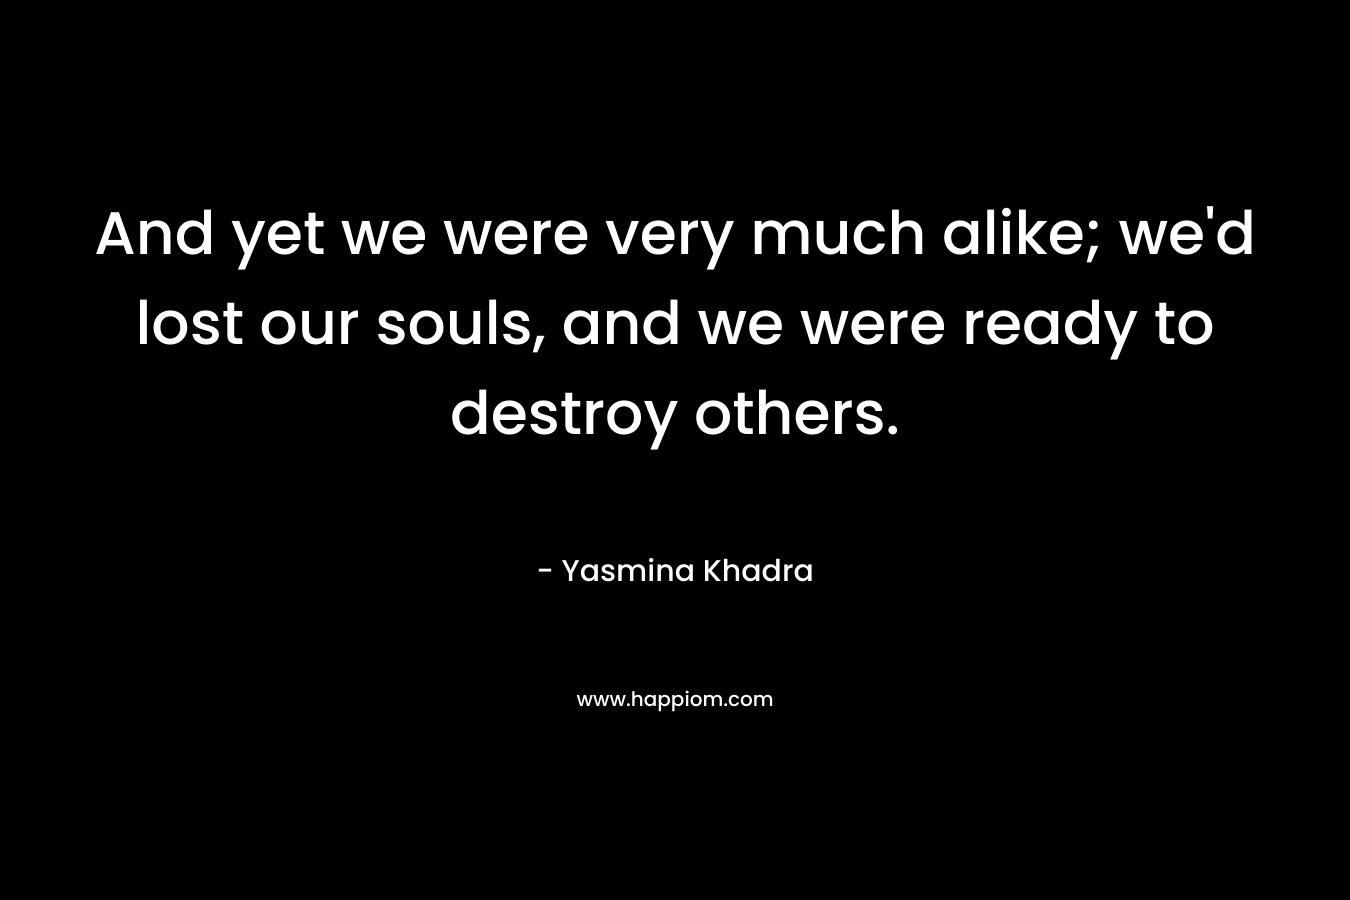 And yet we were very much alike; we’d lost our souls, and we were ready to destroy others. – Yasmina Khadra